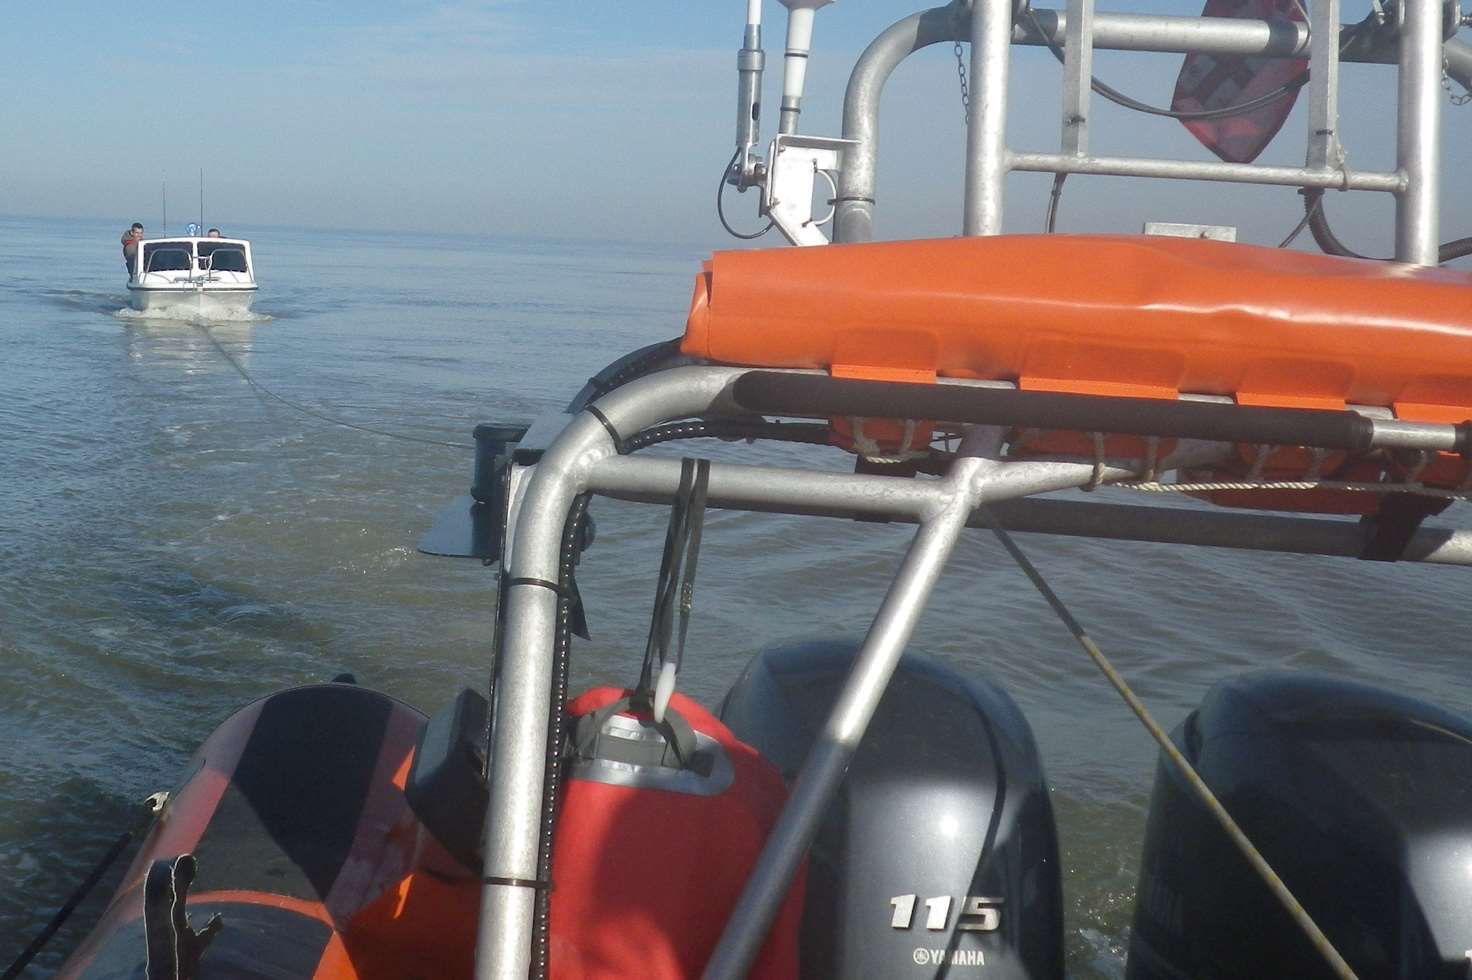 The RNLI vessel tows the stricken boat. Picture courtesy of Whitstable RNLI